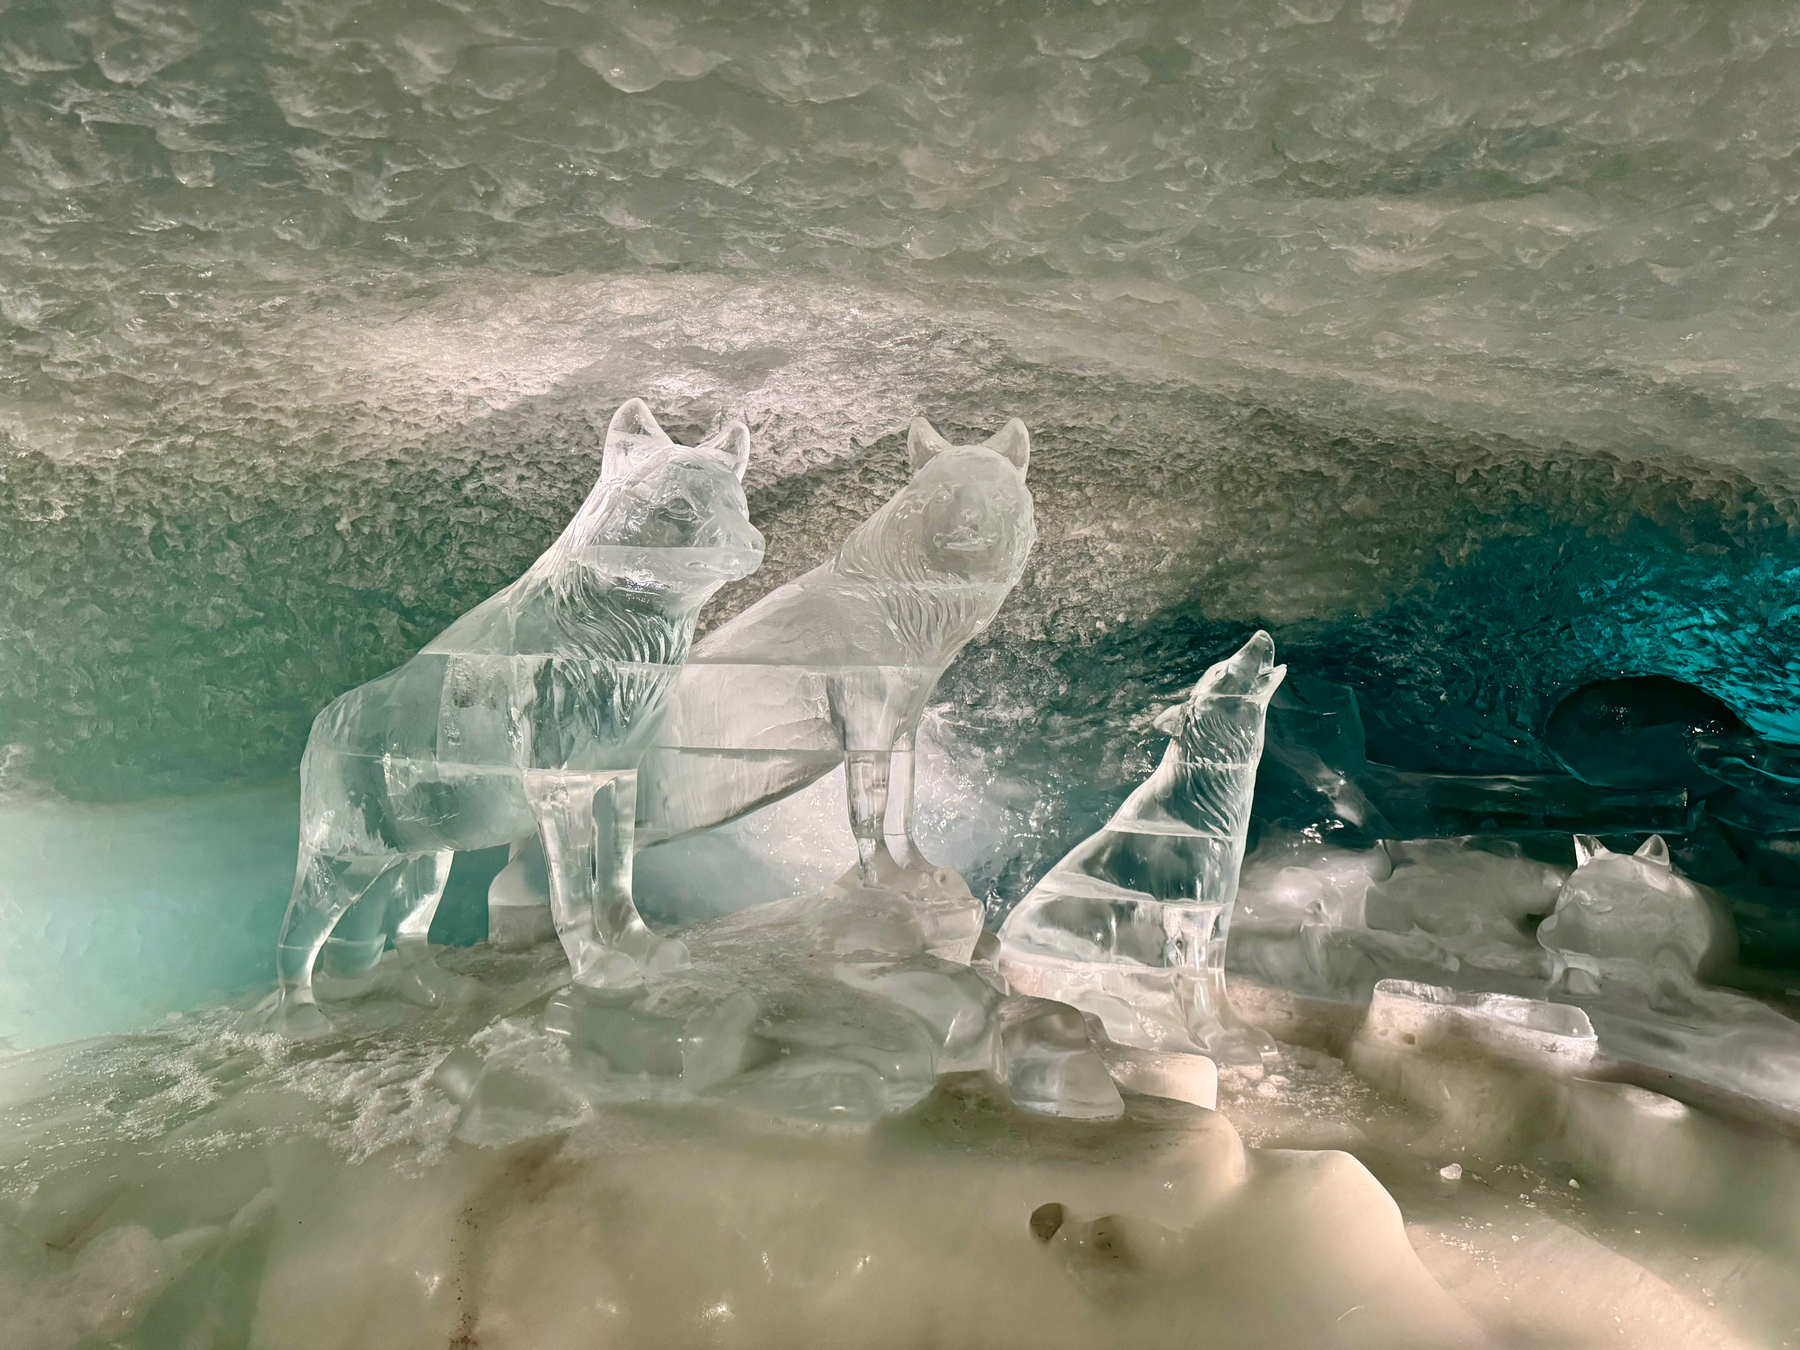 Ice sculptures of wolves displayed in a cave-like setting with icy textures and a blue-green ambient light.